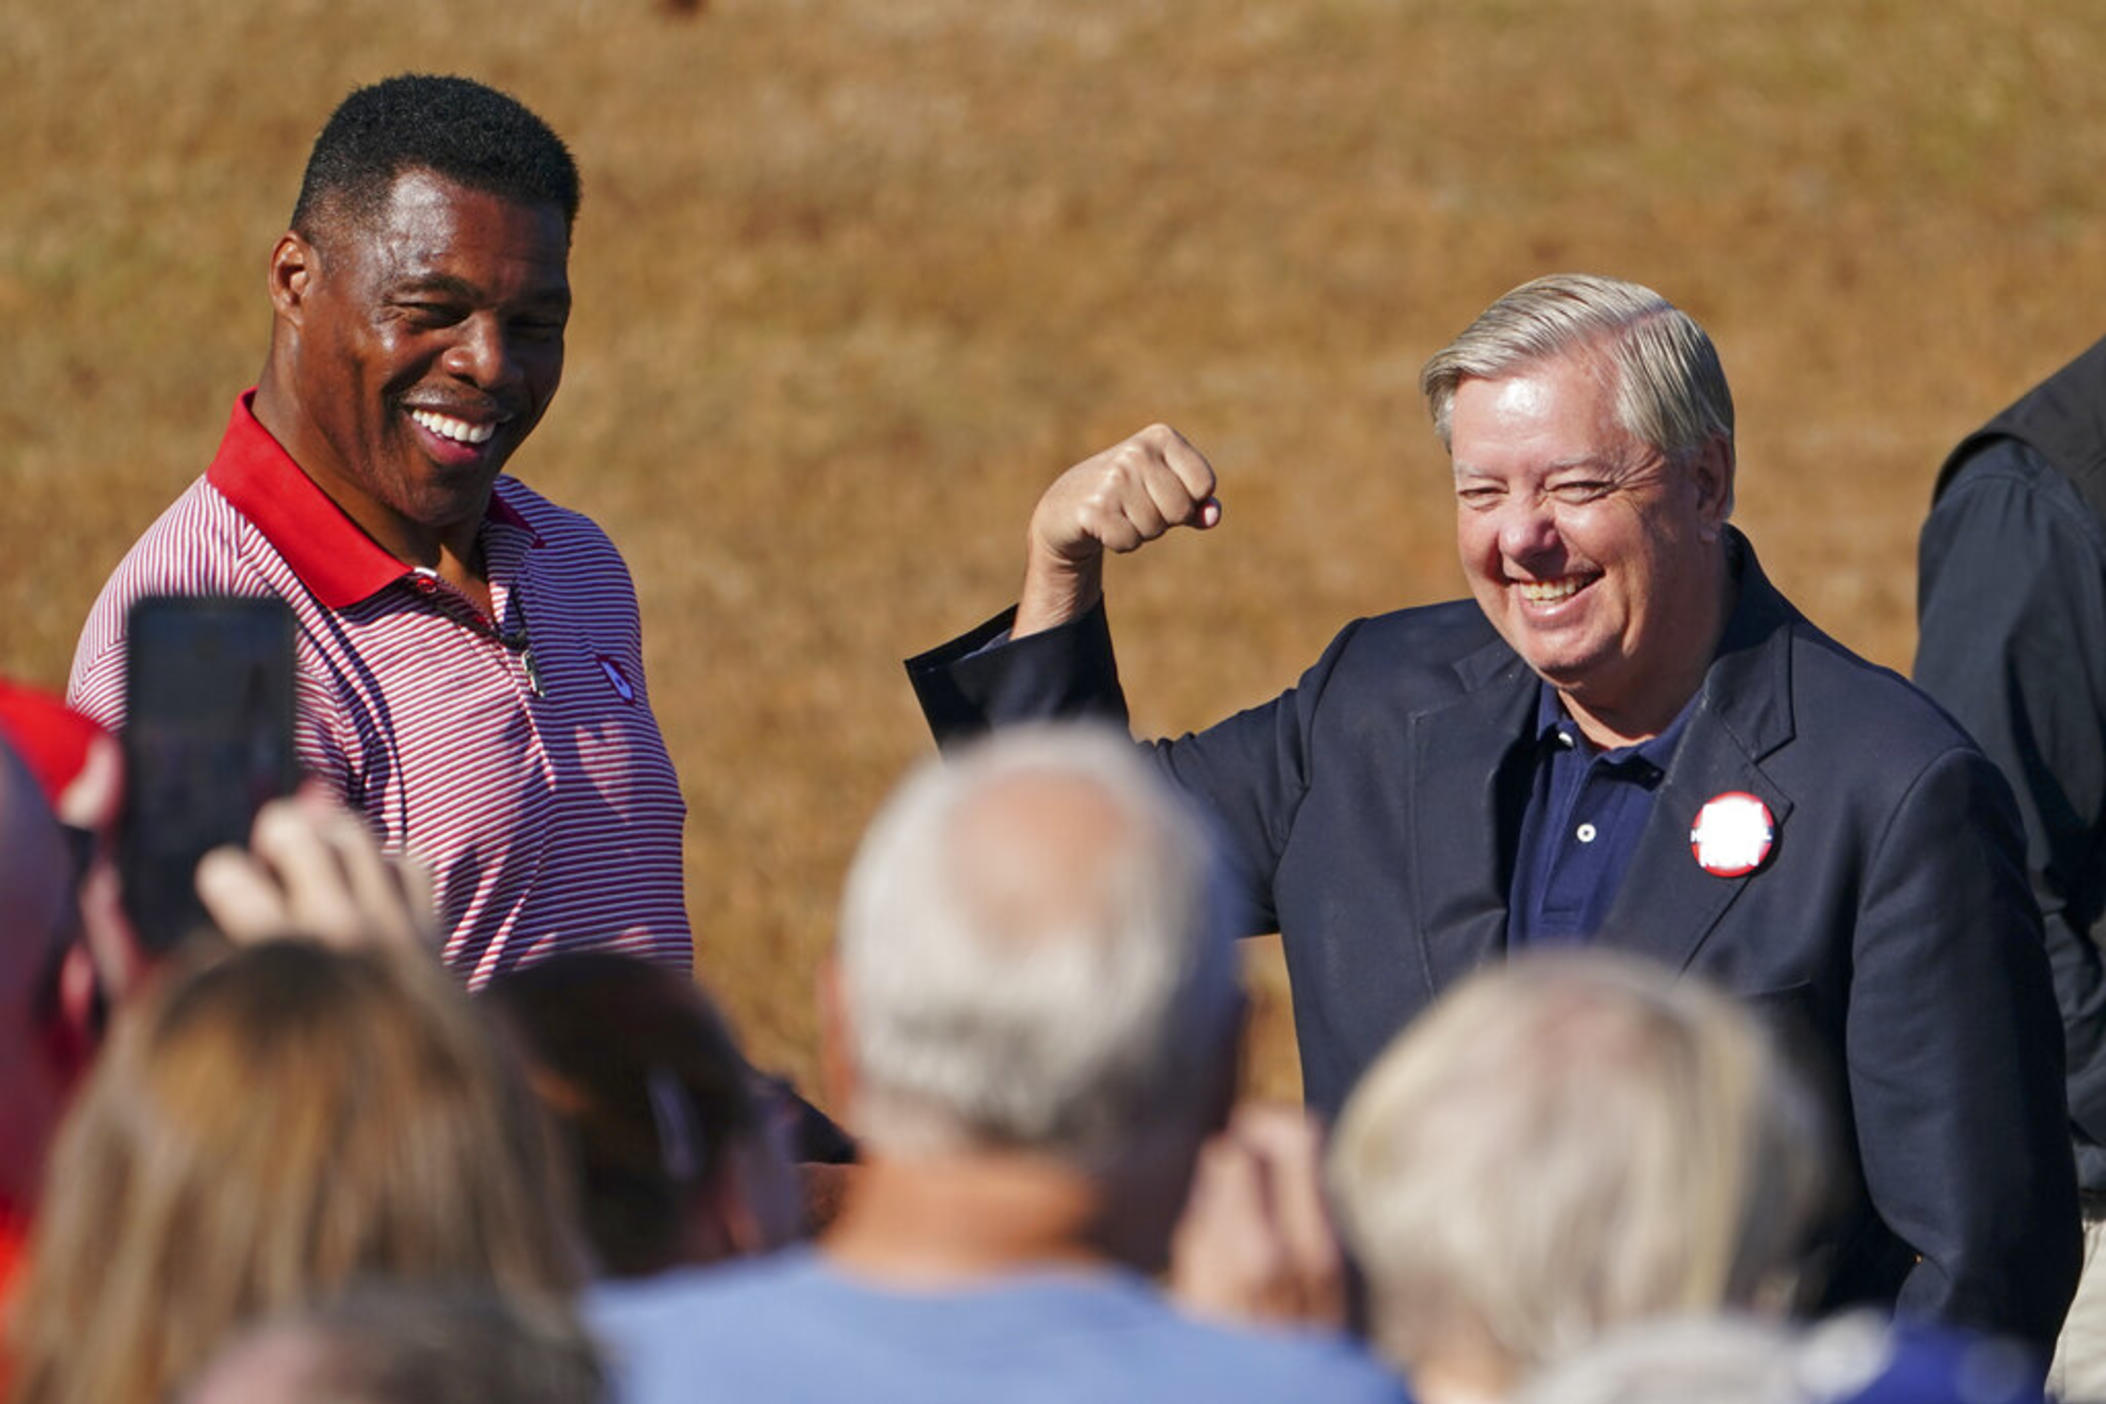 Republican candidate for U.S. Senate Herschel Walker, left, and Sen. Lindsey Graham, R-S.C., gesture to the crowd as they arrive for a campaign stop in Cumming, Ga., Thursday, Oct. 27, 2022.